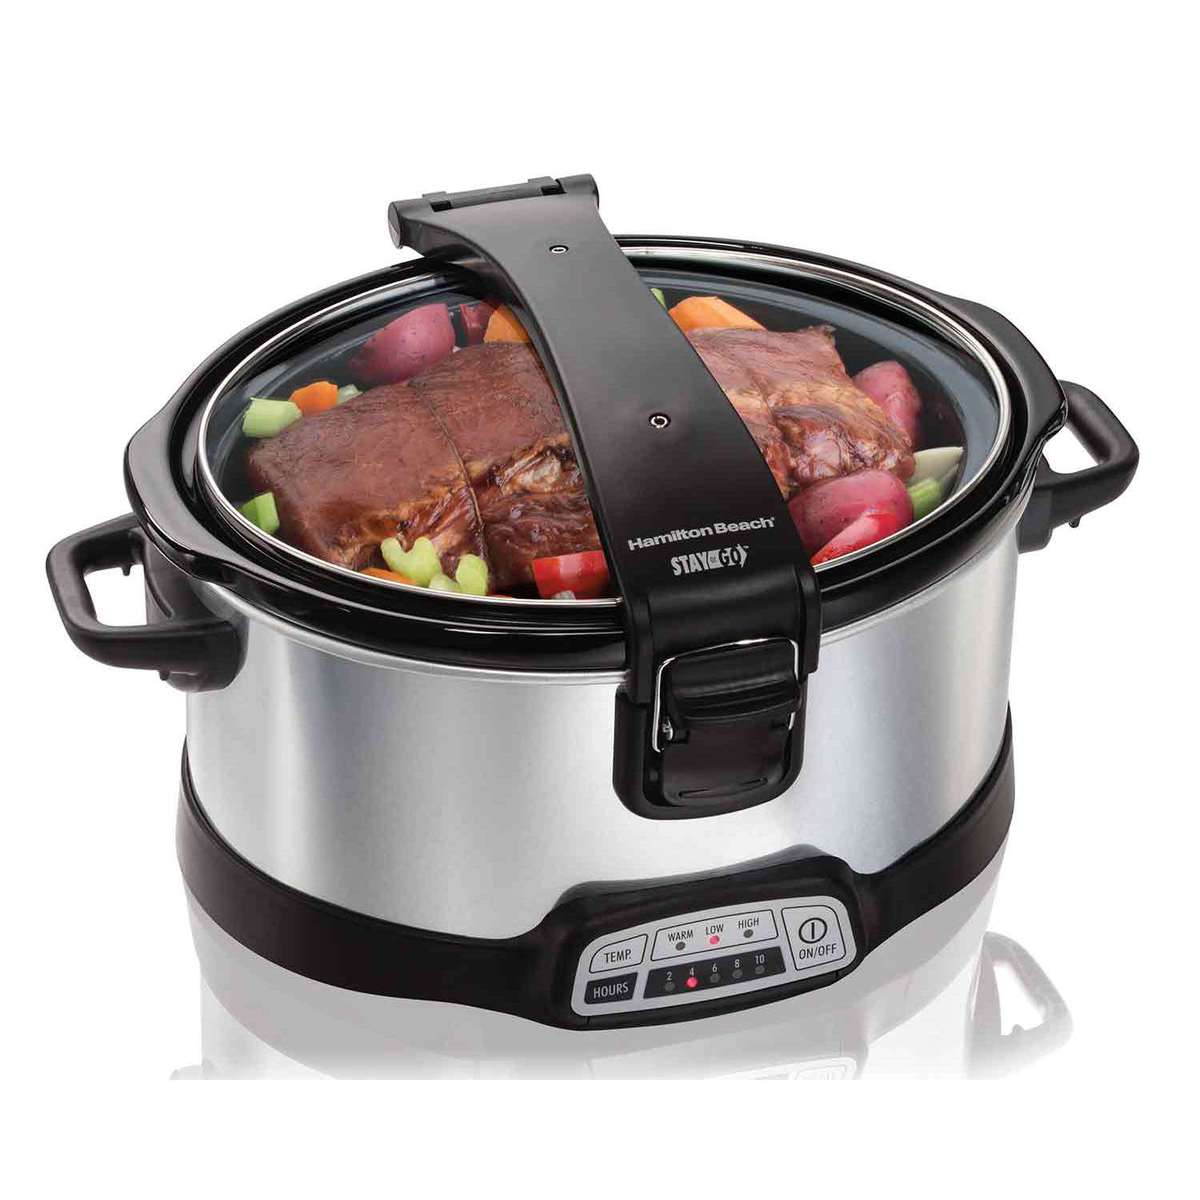 Programmable Stay or Go® 6 Quart Slow Cooker (33467)